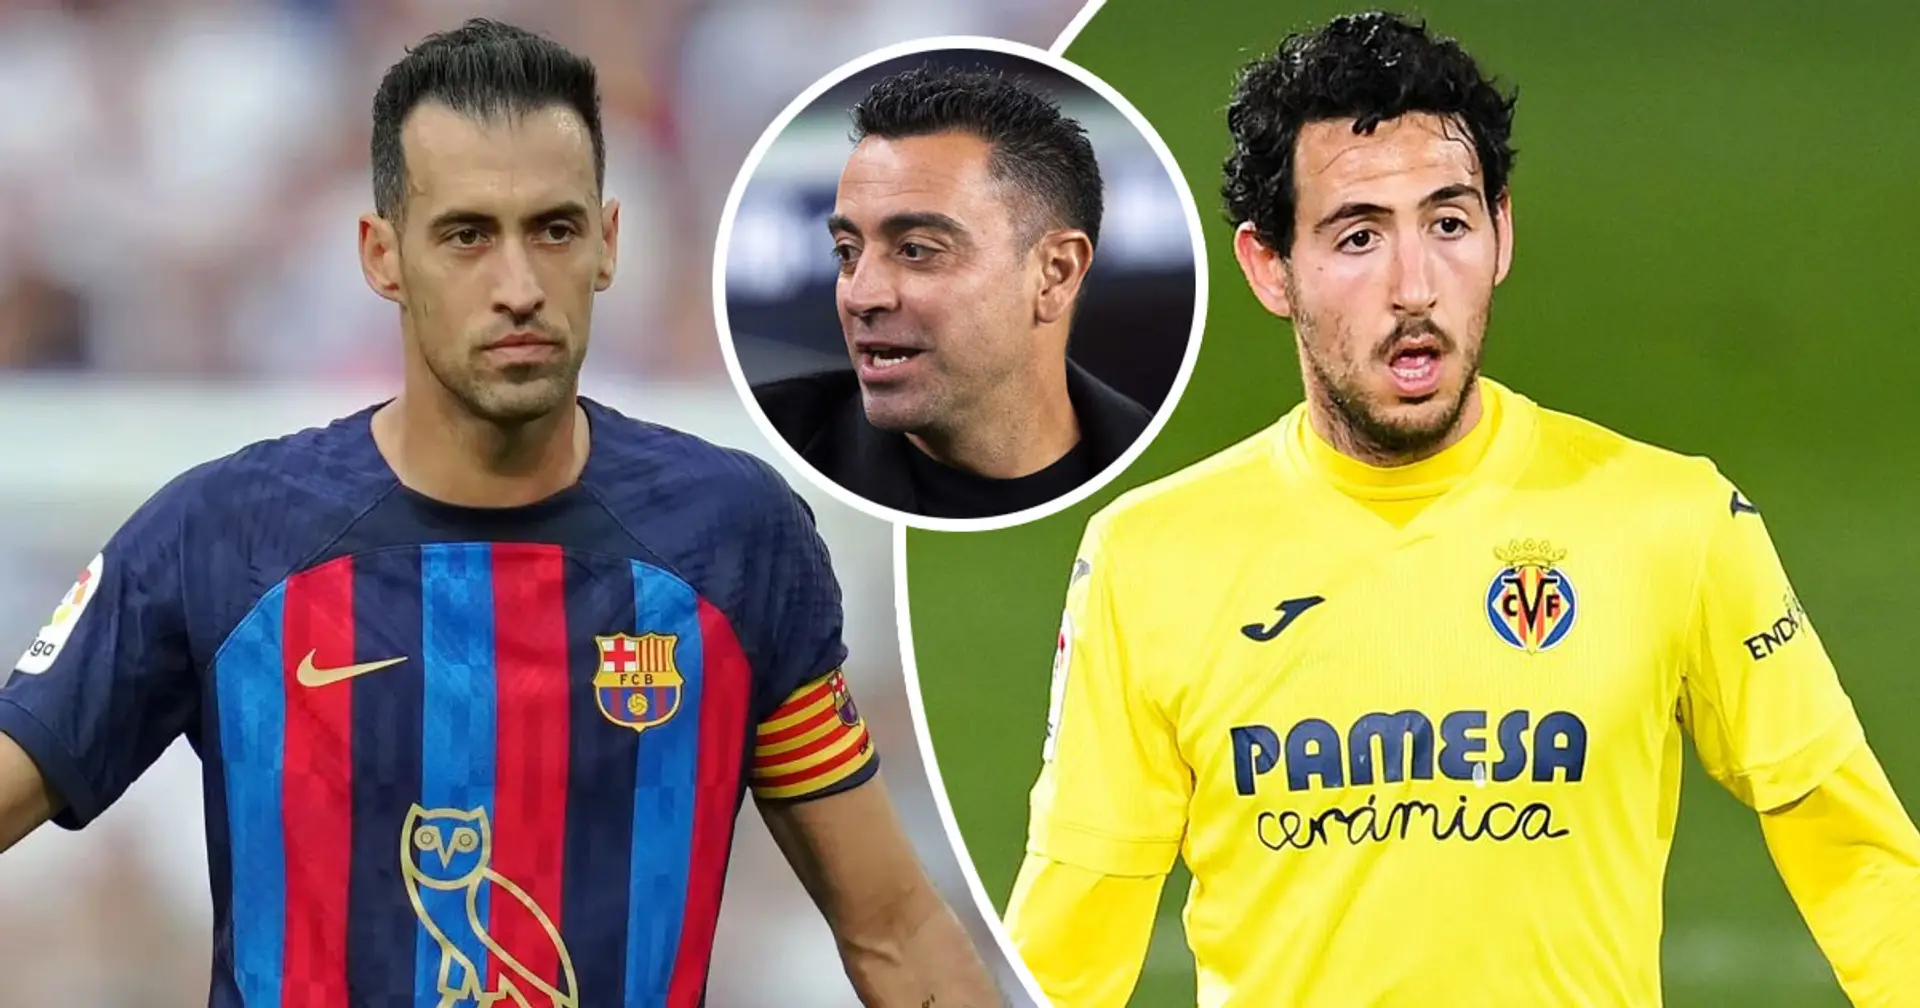 Xavi wants 33-year-old Parejo to replace Busquets next summer - top source